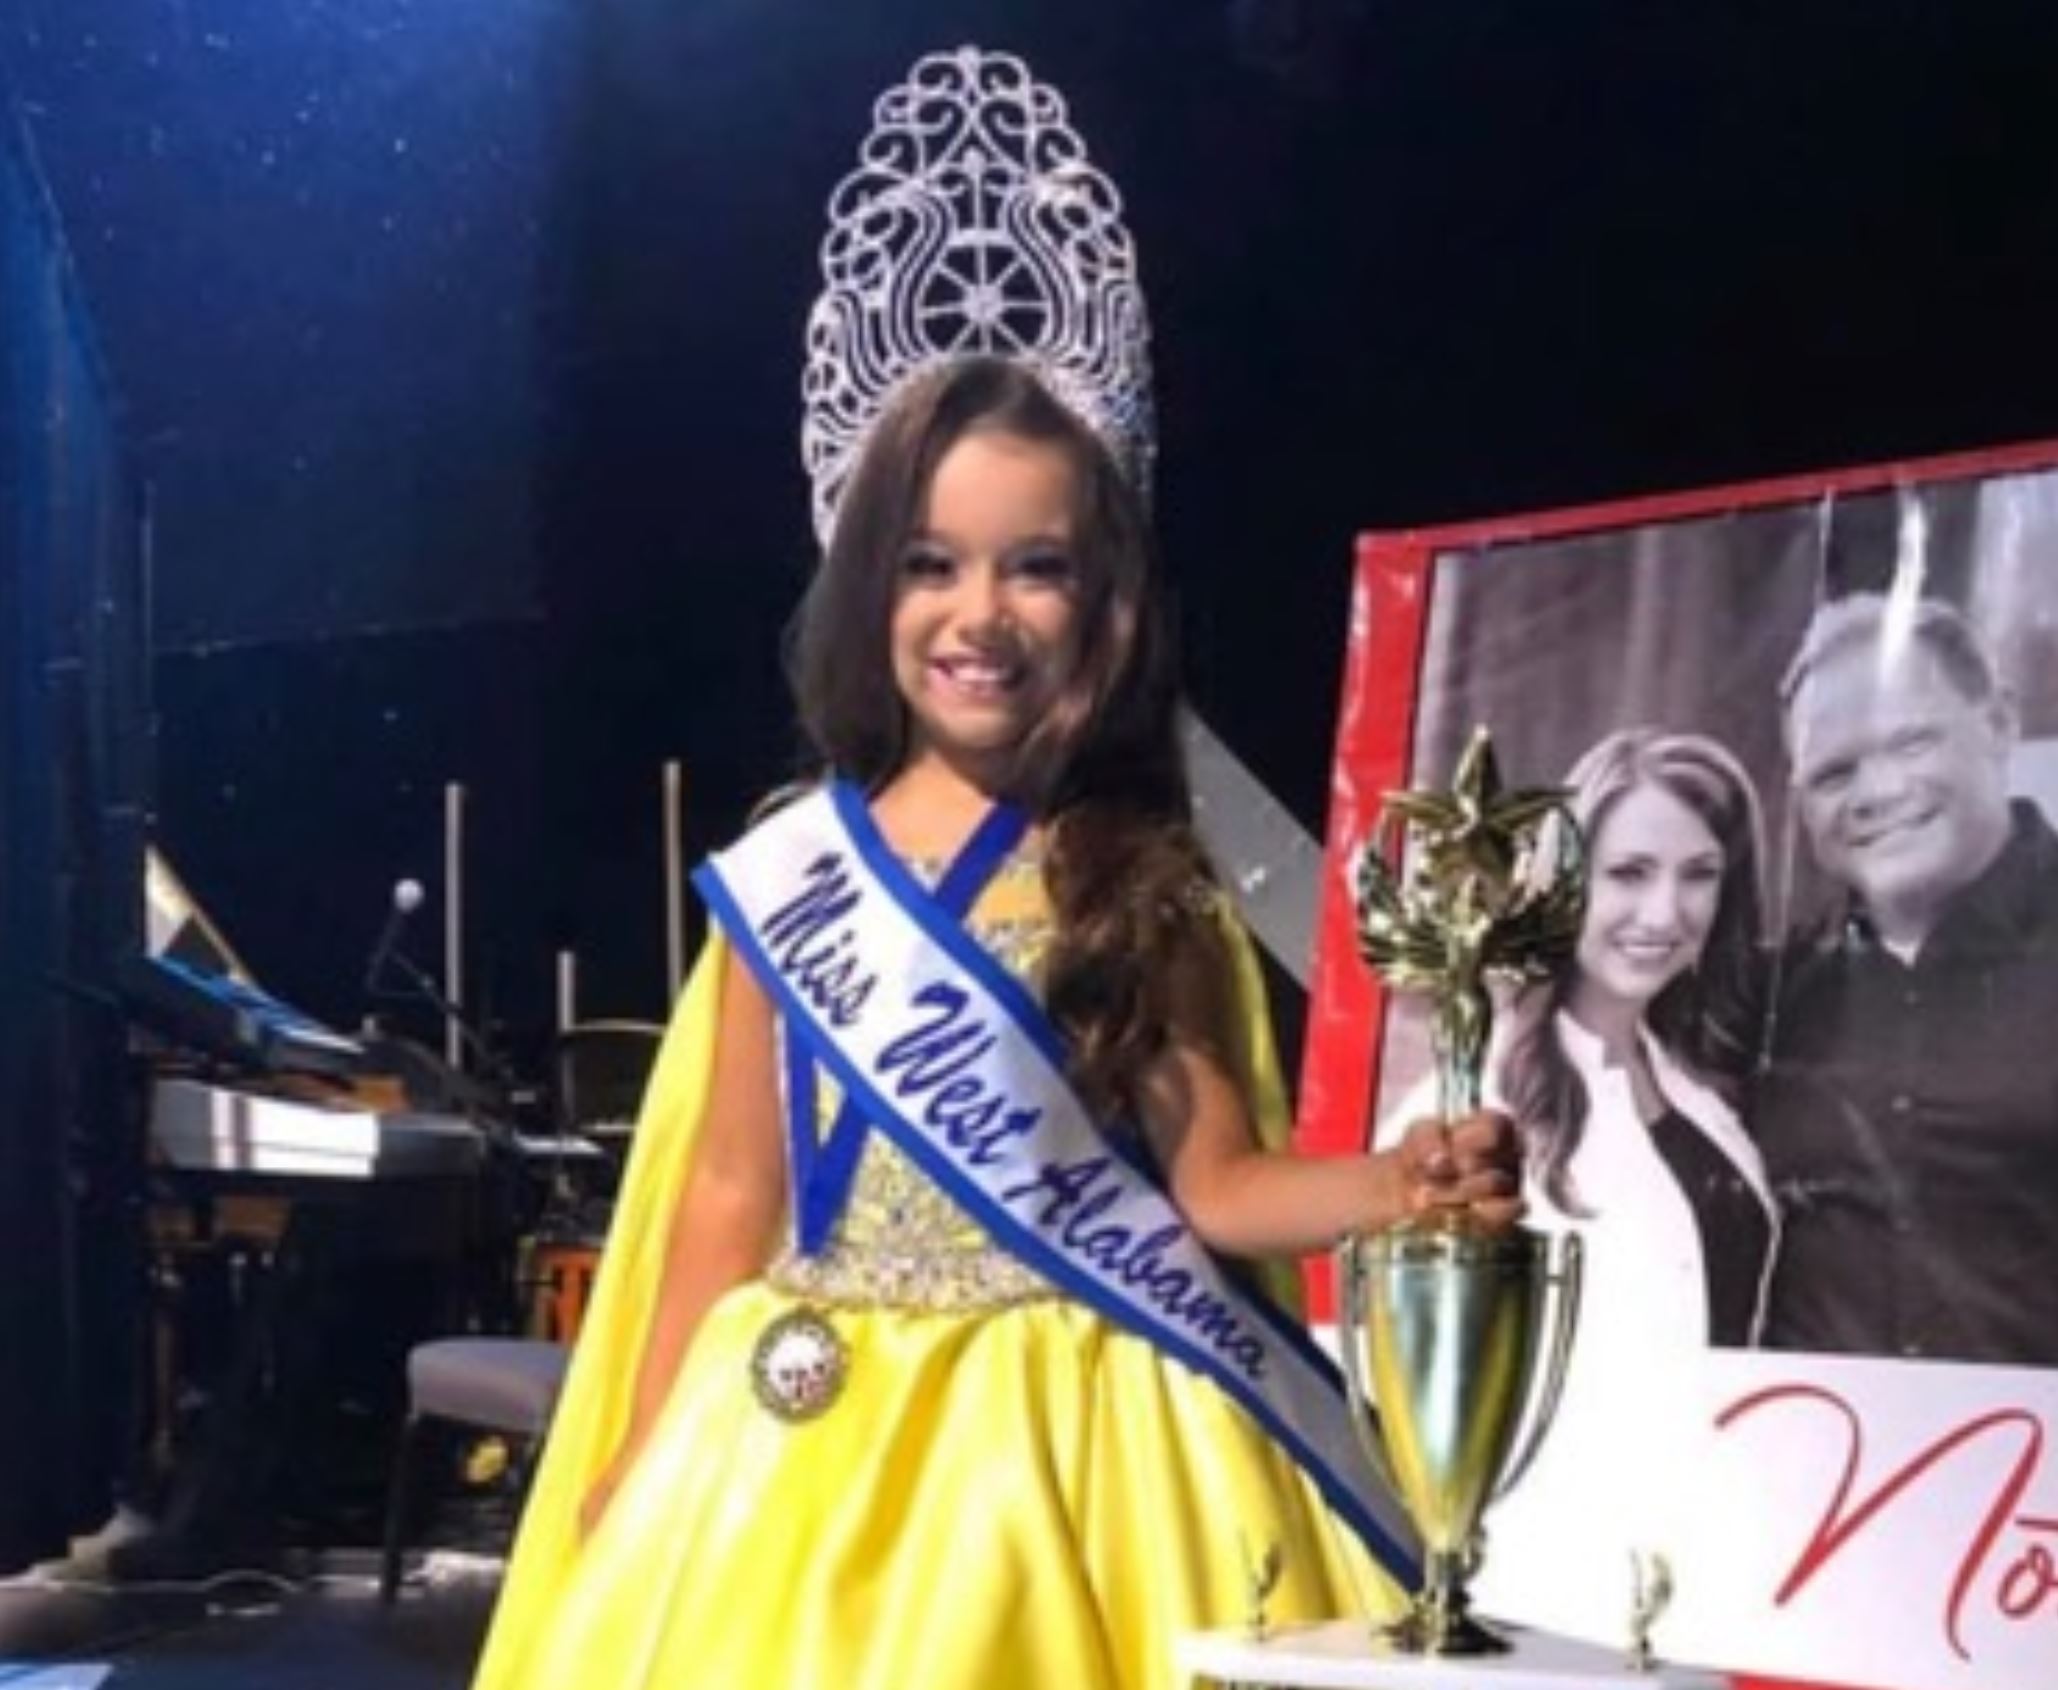 Trussville Spotlight: Ava Price crowned 2020 Miss West Alabama in Tuscaloosa